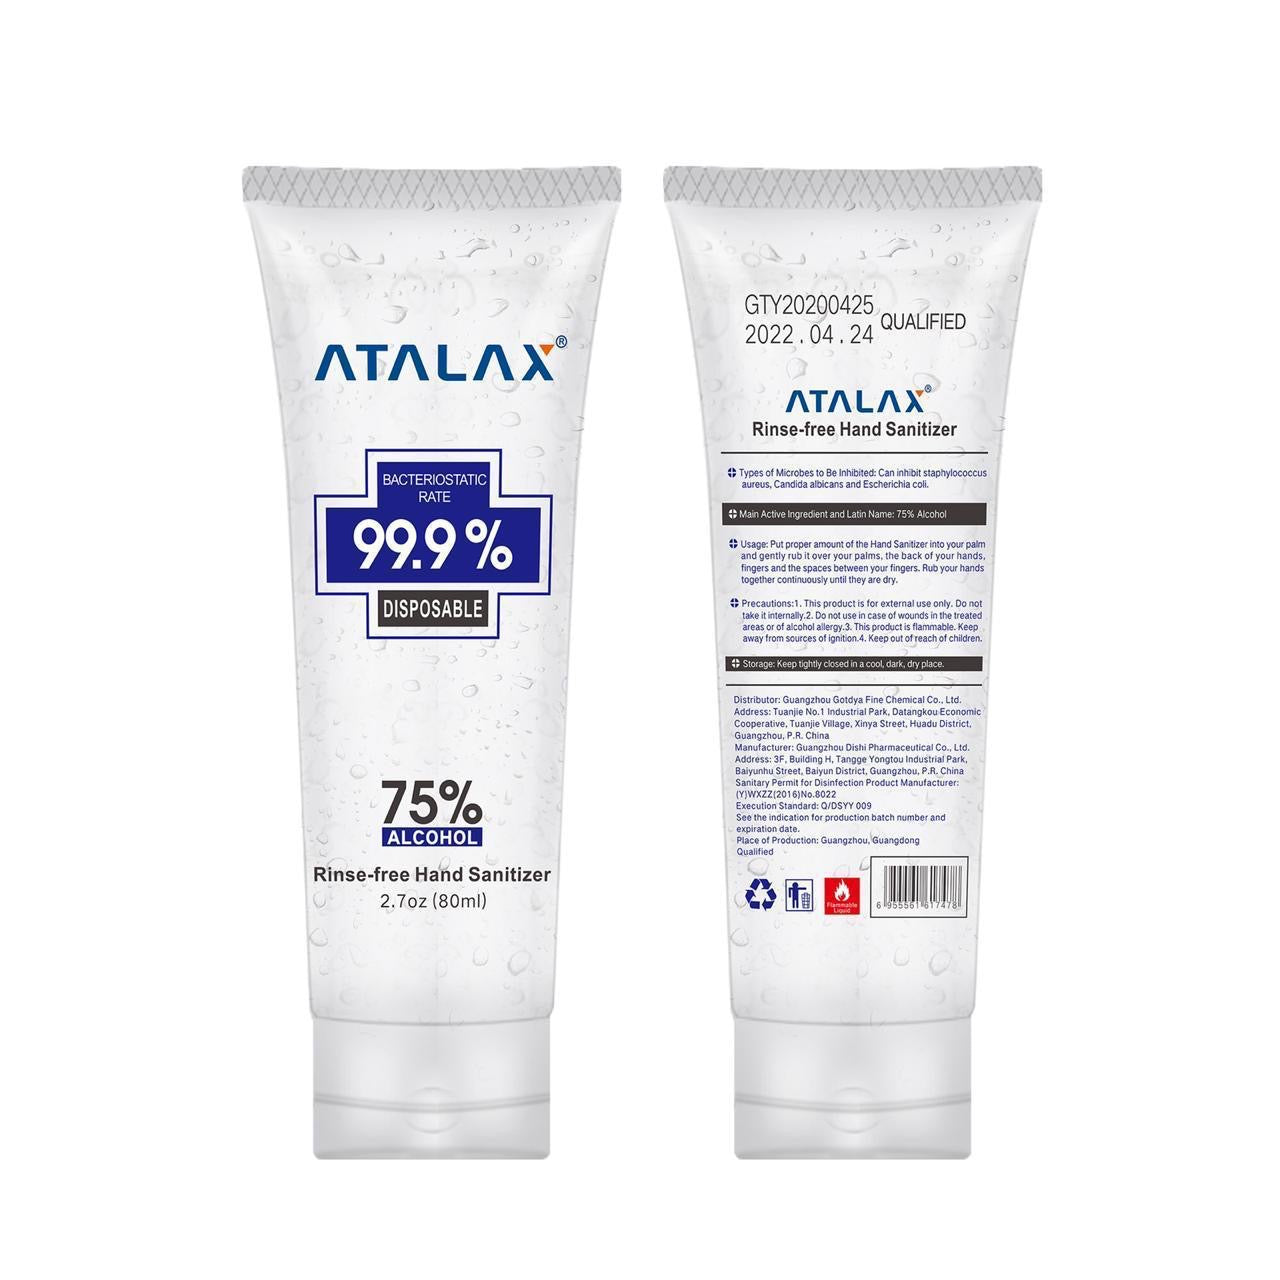 Hand Sanitizer 75% Alcohol 2.7 oz by Atalax "3-PACK"